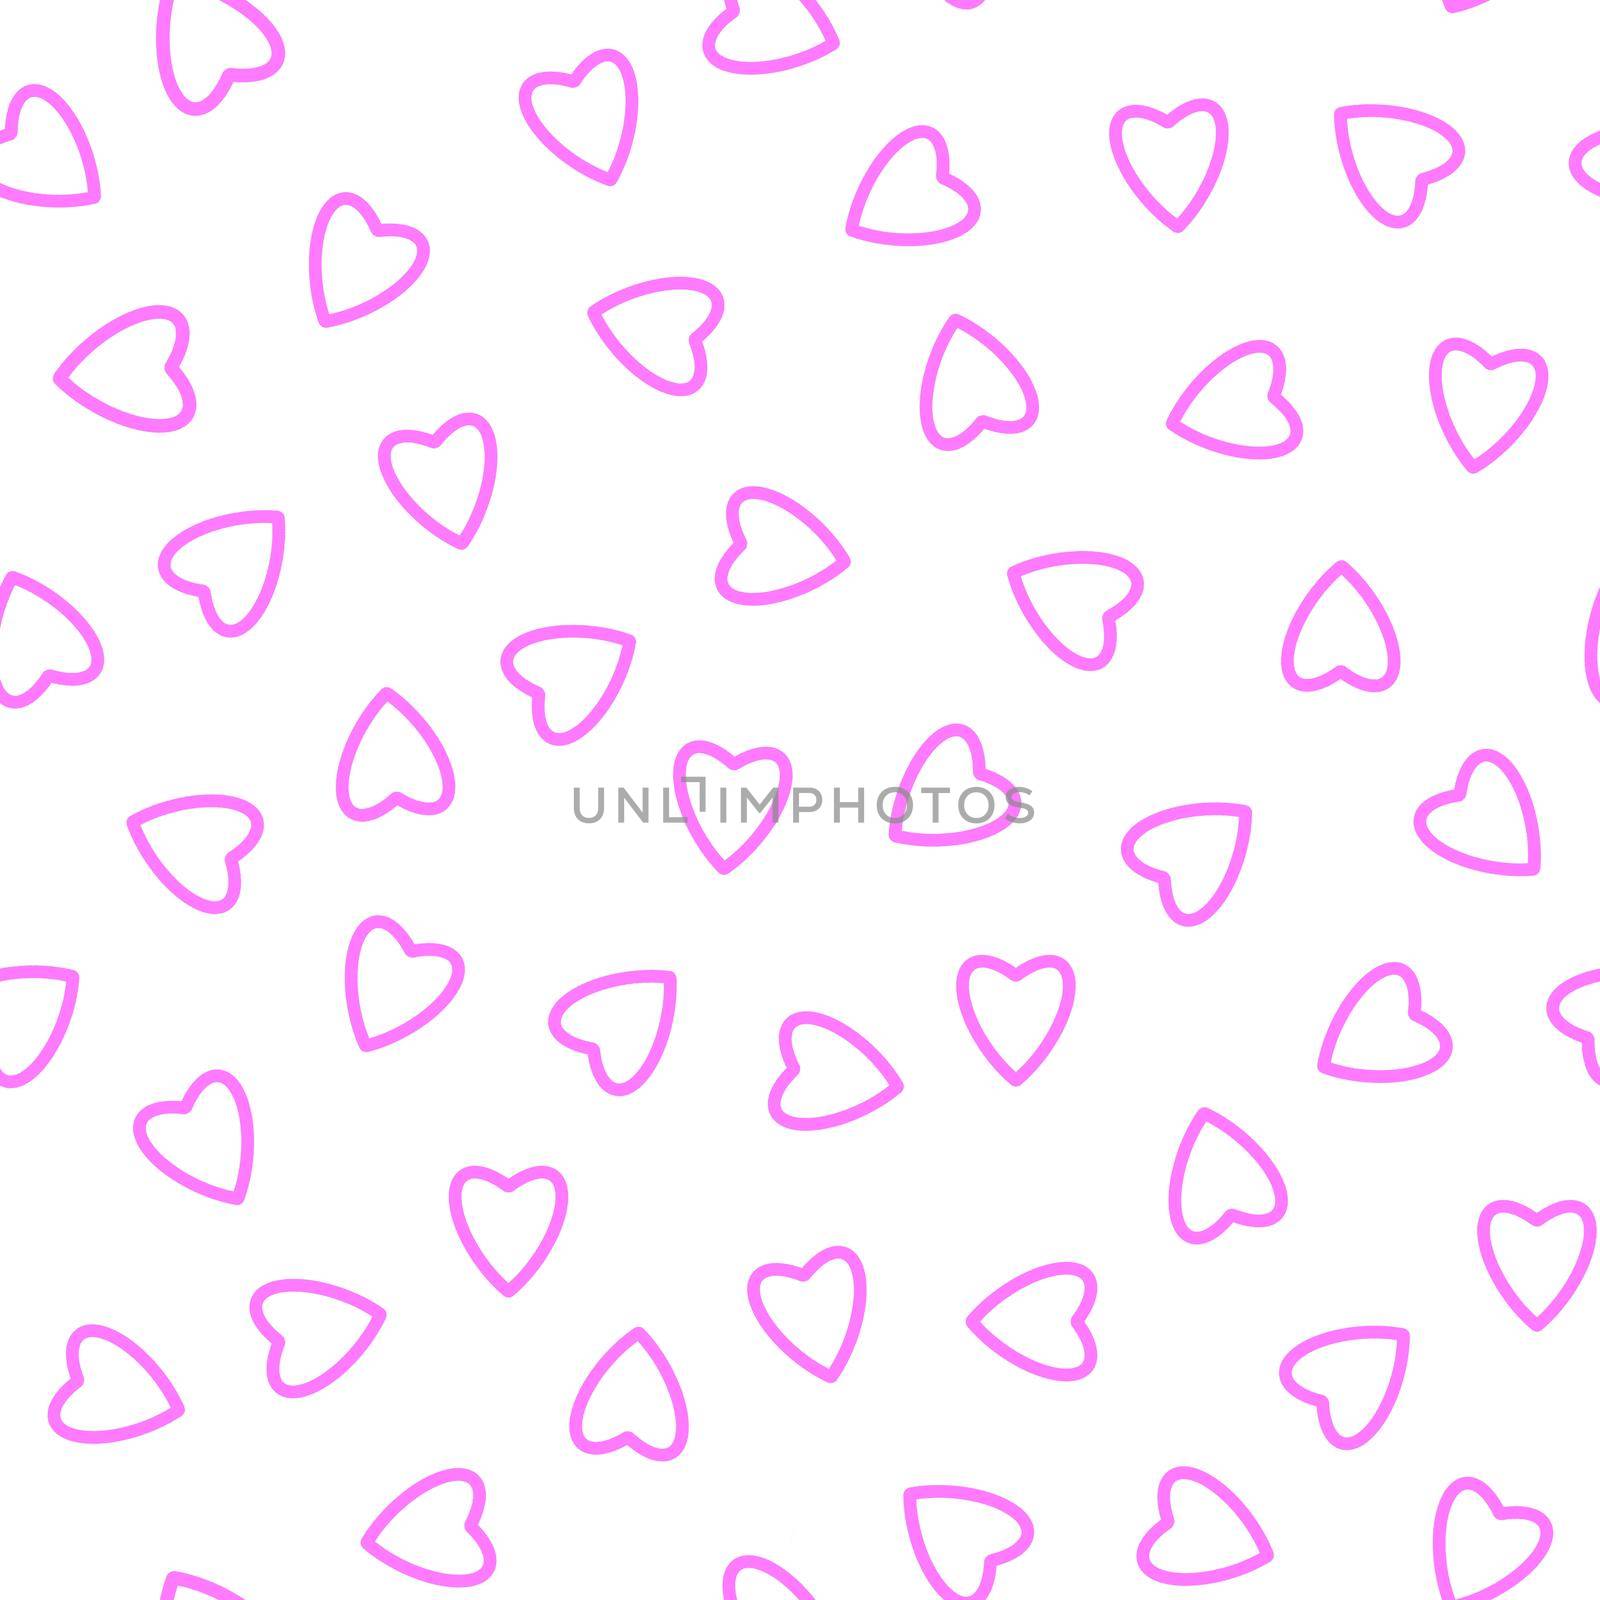 Simple hearts seamless pattern,endless chaotic texture made of tiny heart silhouettes.Valentines,mothers day background.Great for Easter,wedding,scrapbook,gift wrapping paper,textiles.Pink on white by Angelsmoon